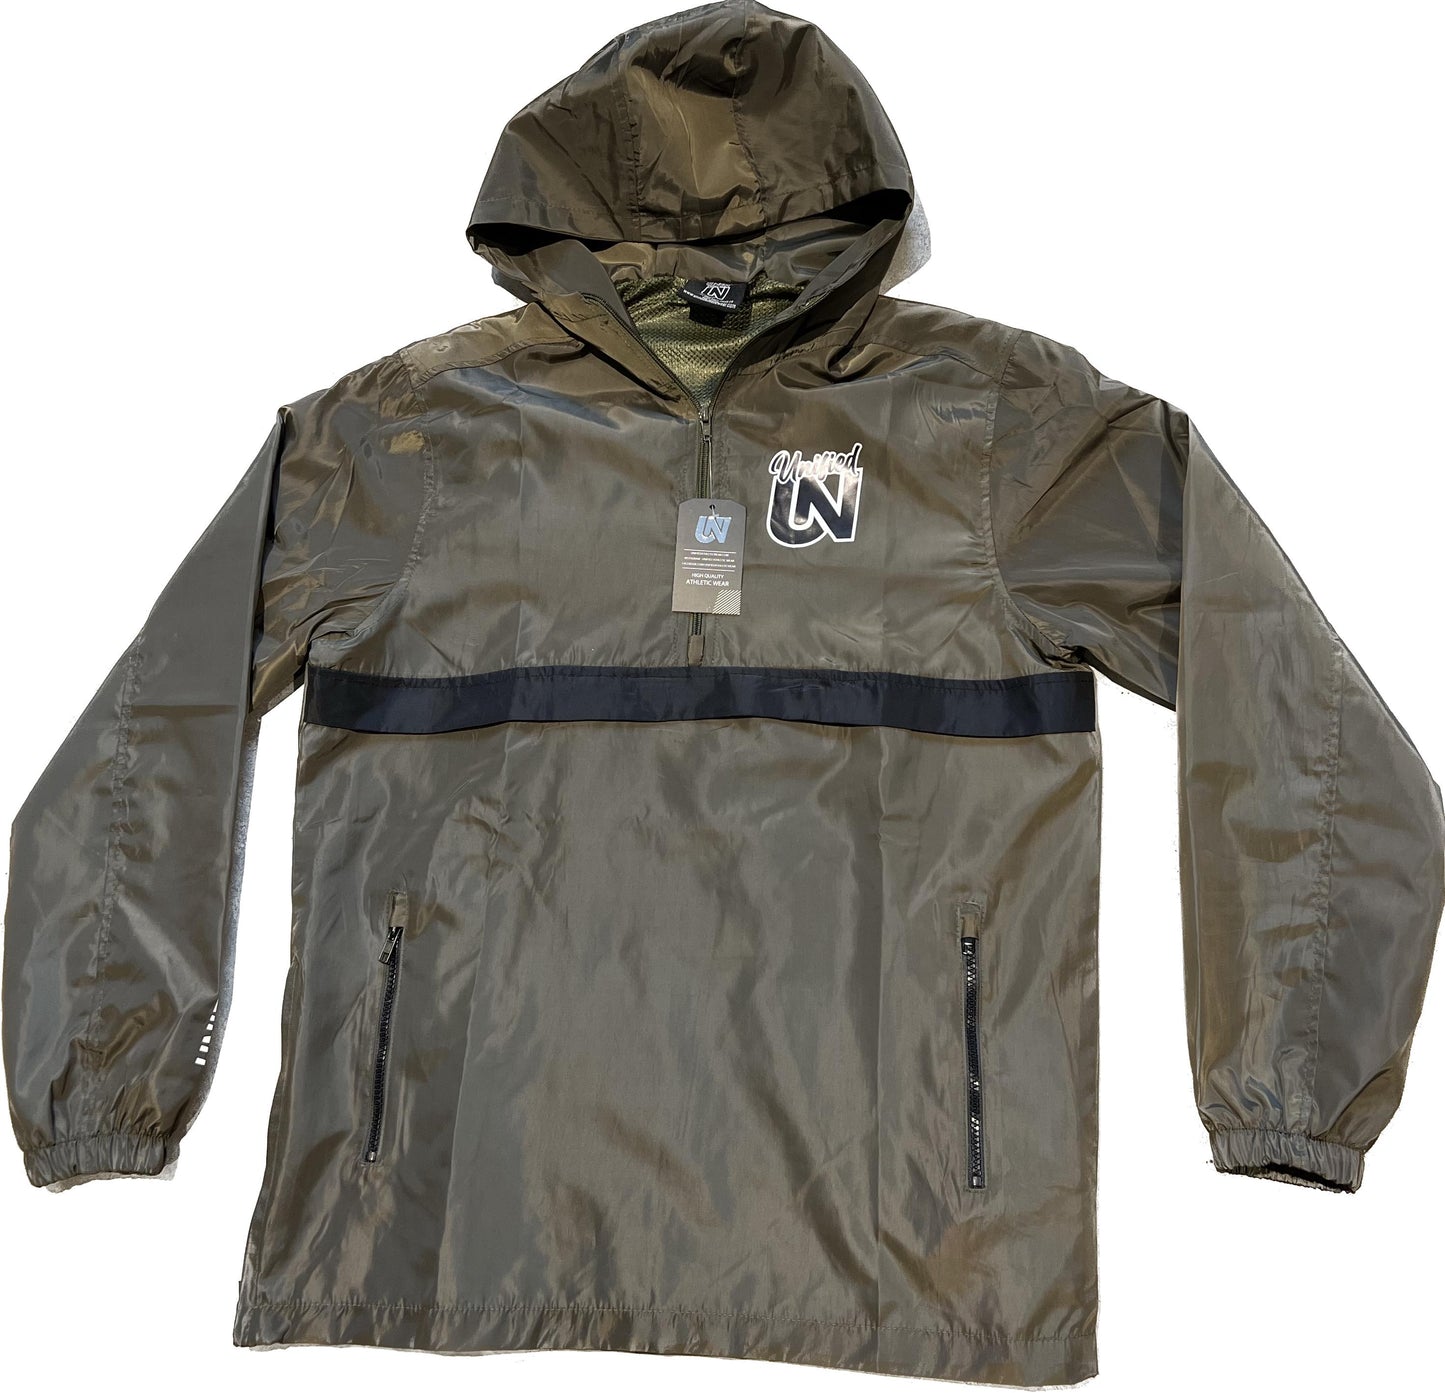 Unified Outdoor Jacket